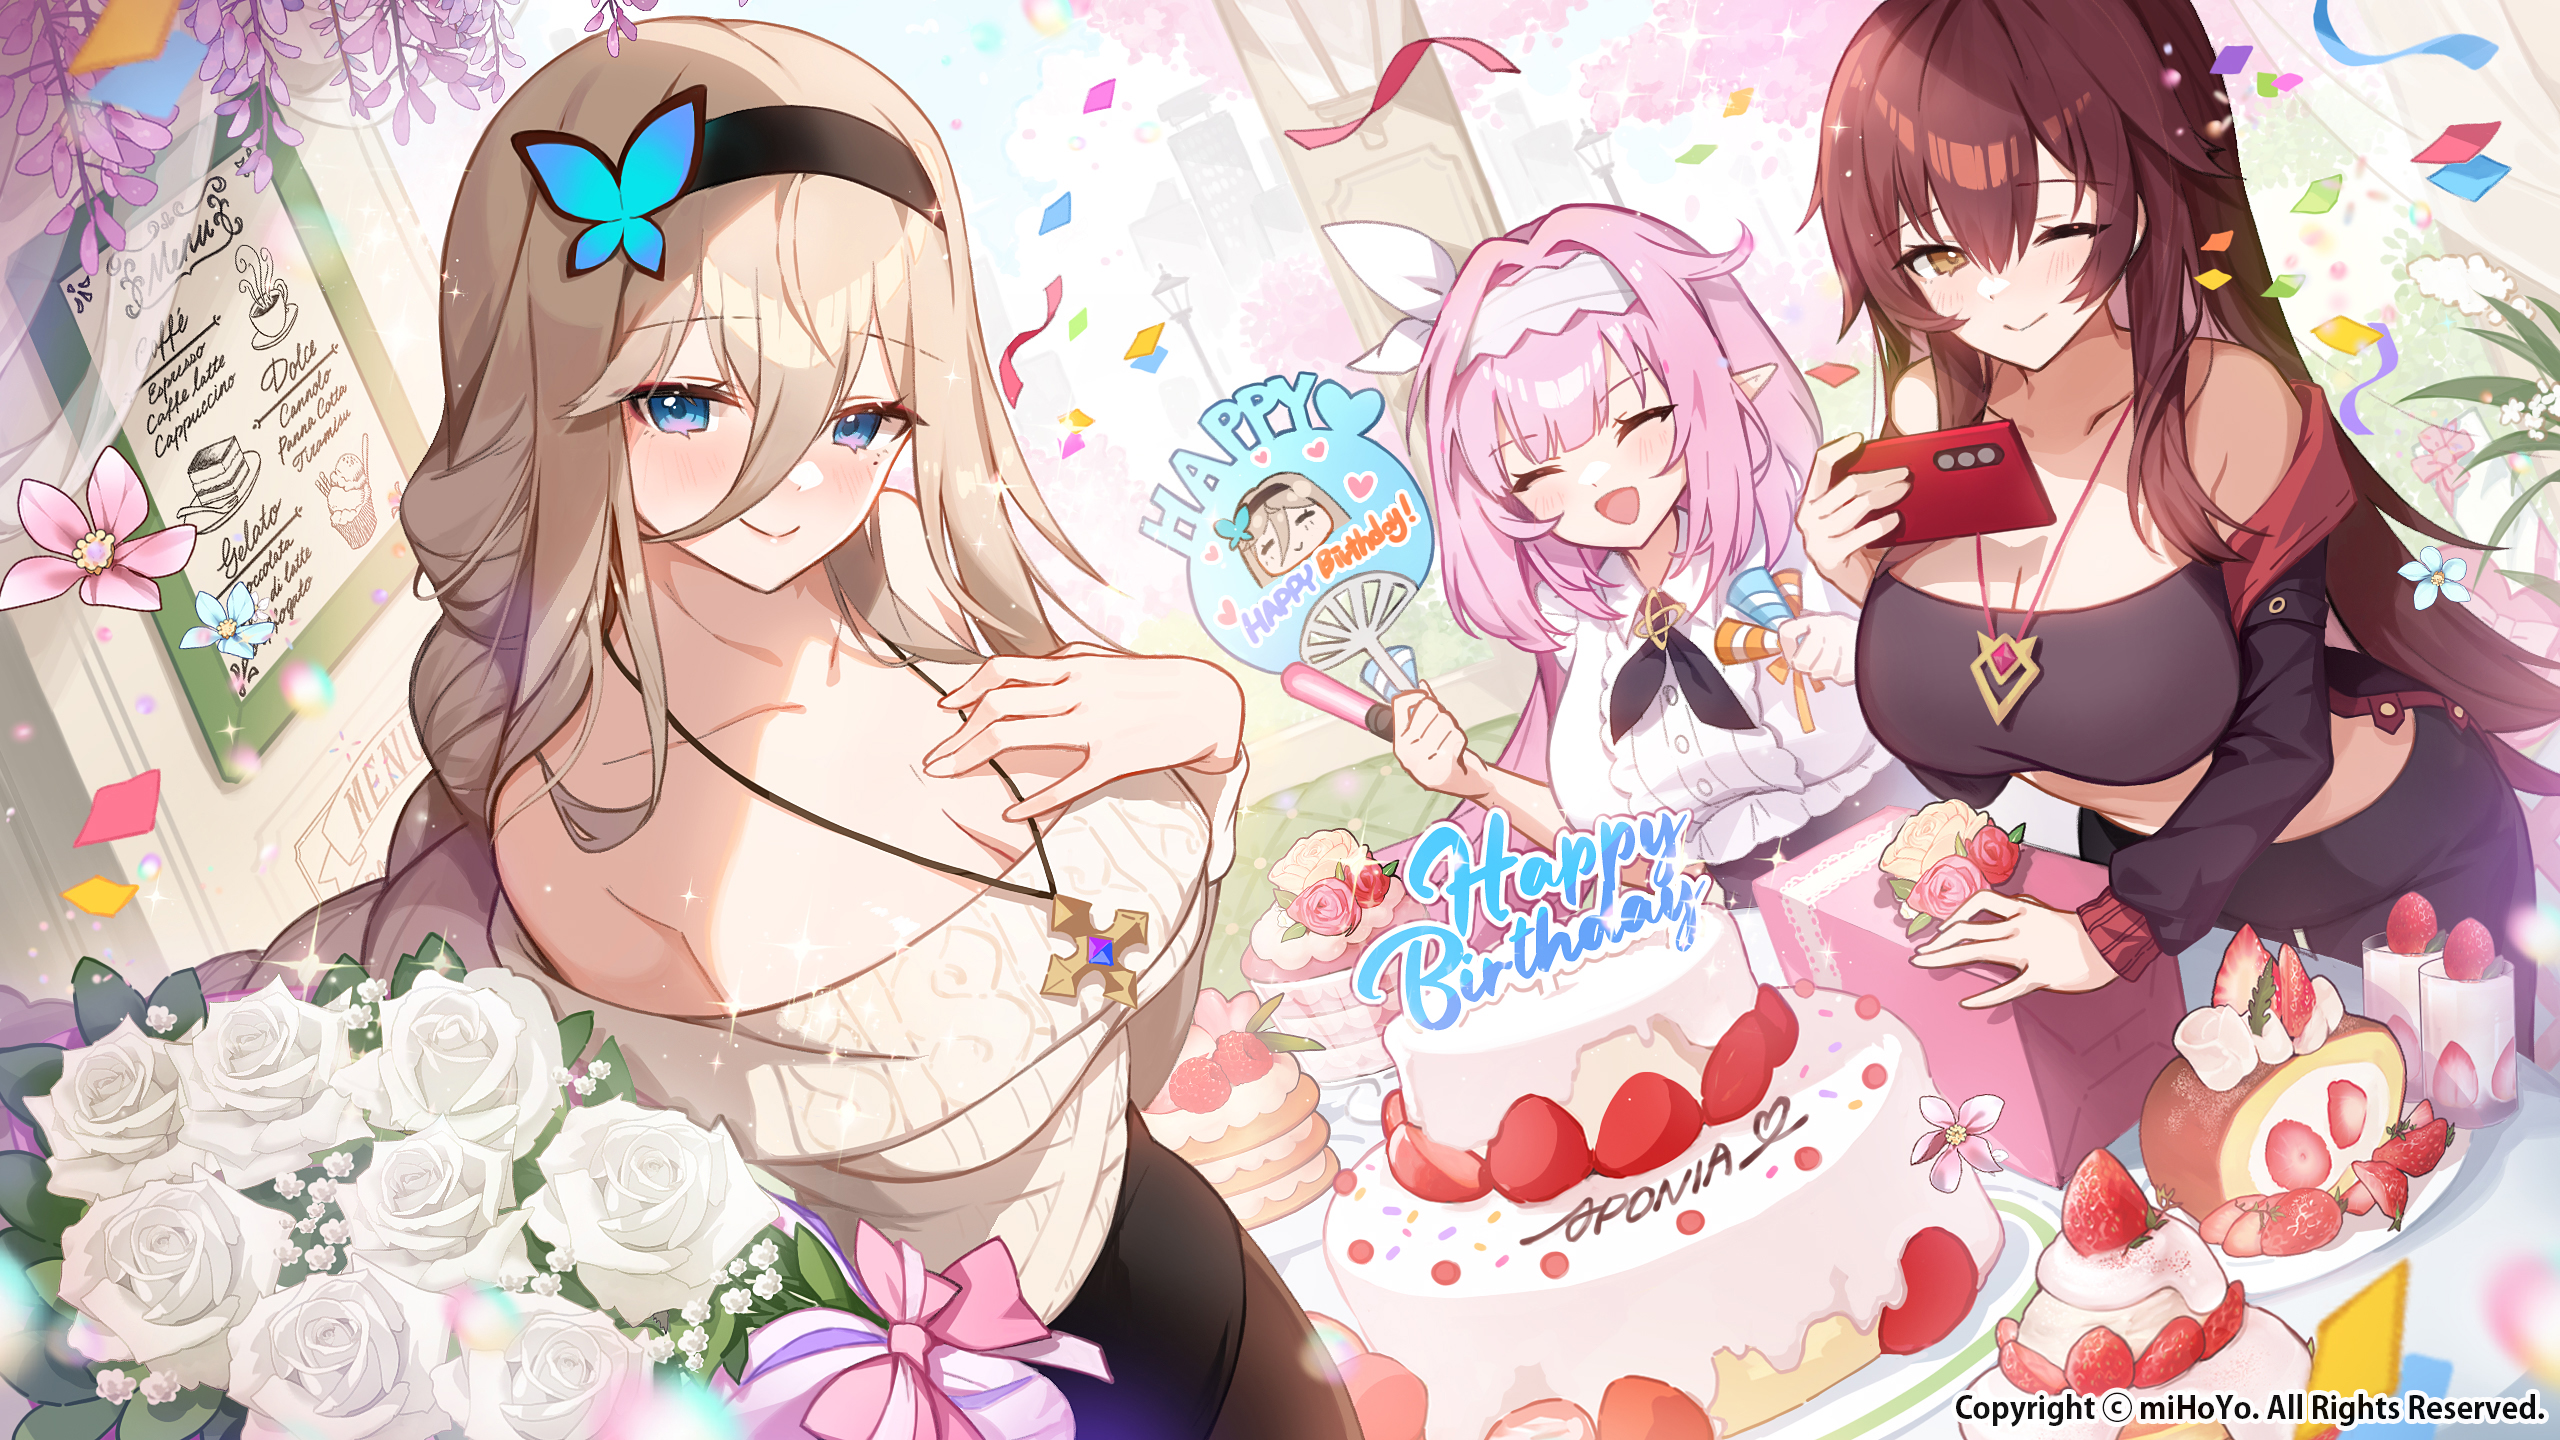 Anime 2560x1440 anime Pixiv anime girls necklace one eye closed wink smiling flowers confetti cake strawberries birthday looking at viewer big boobs cleavage long hair braids pointy ears closed eyes bow tie leaves presents fans phone Honkai Impact 3rd Aponia Eden (Honkai Imapact 3rd) Elysia (Honkai Impact 3rd) Honkai Impact